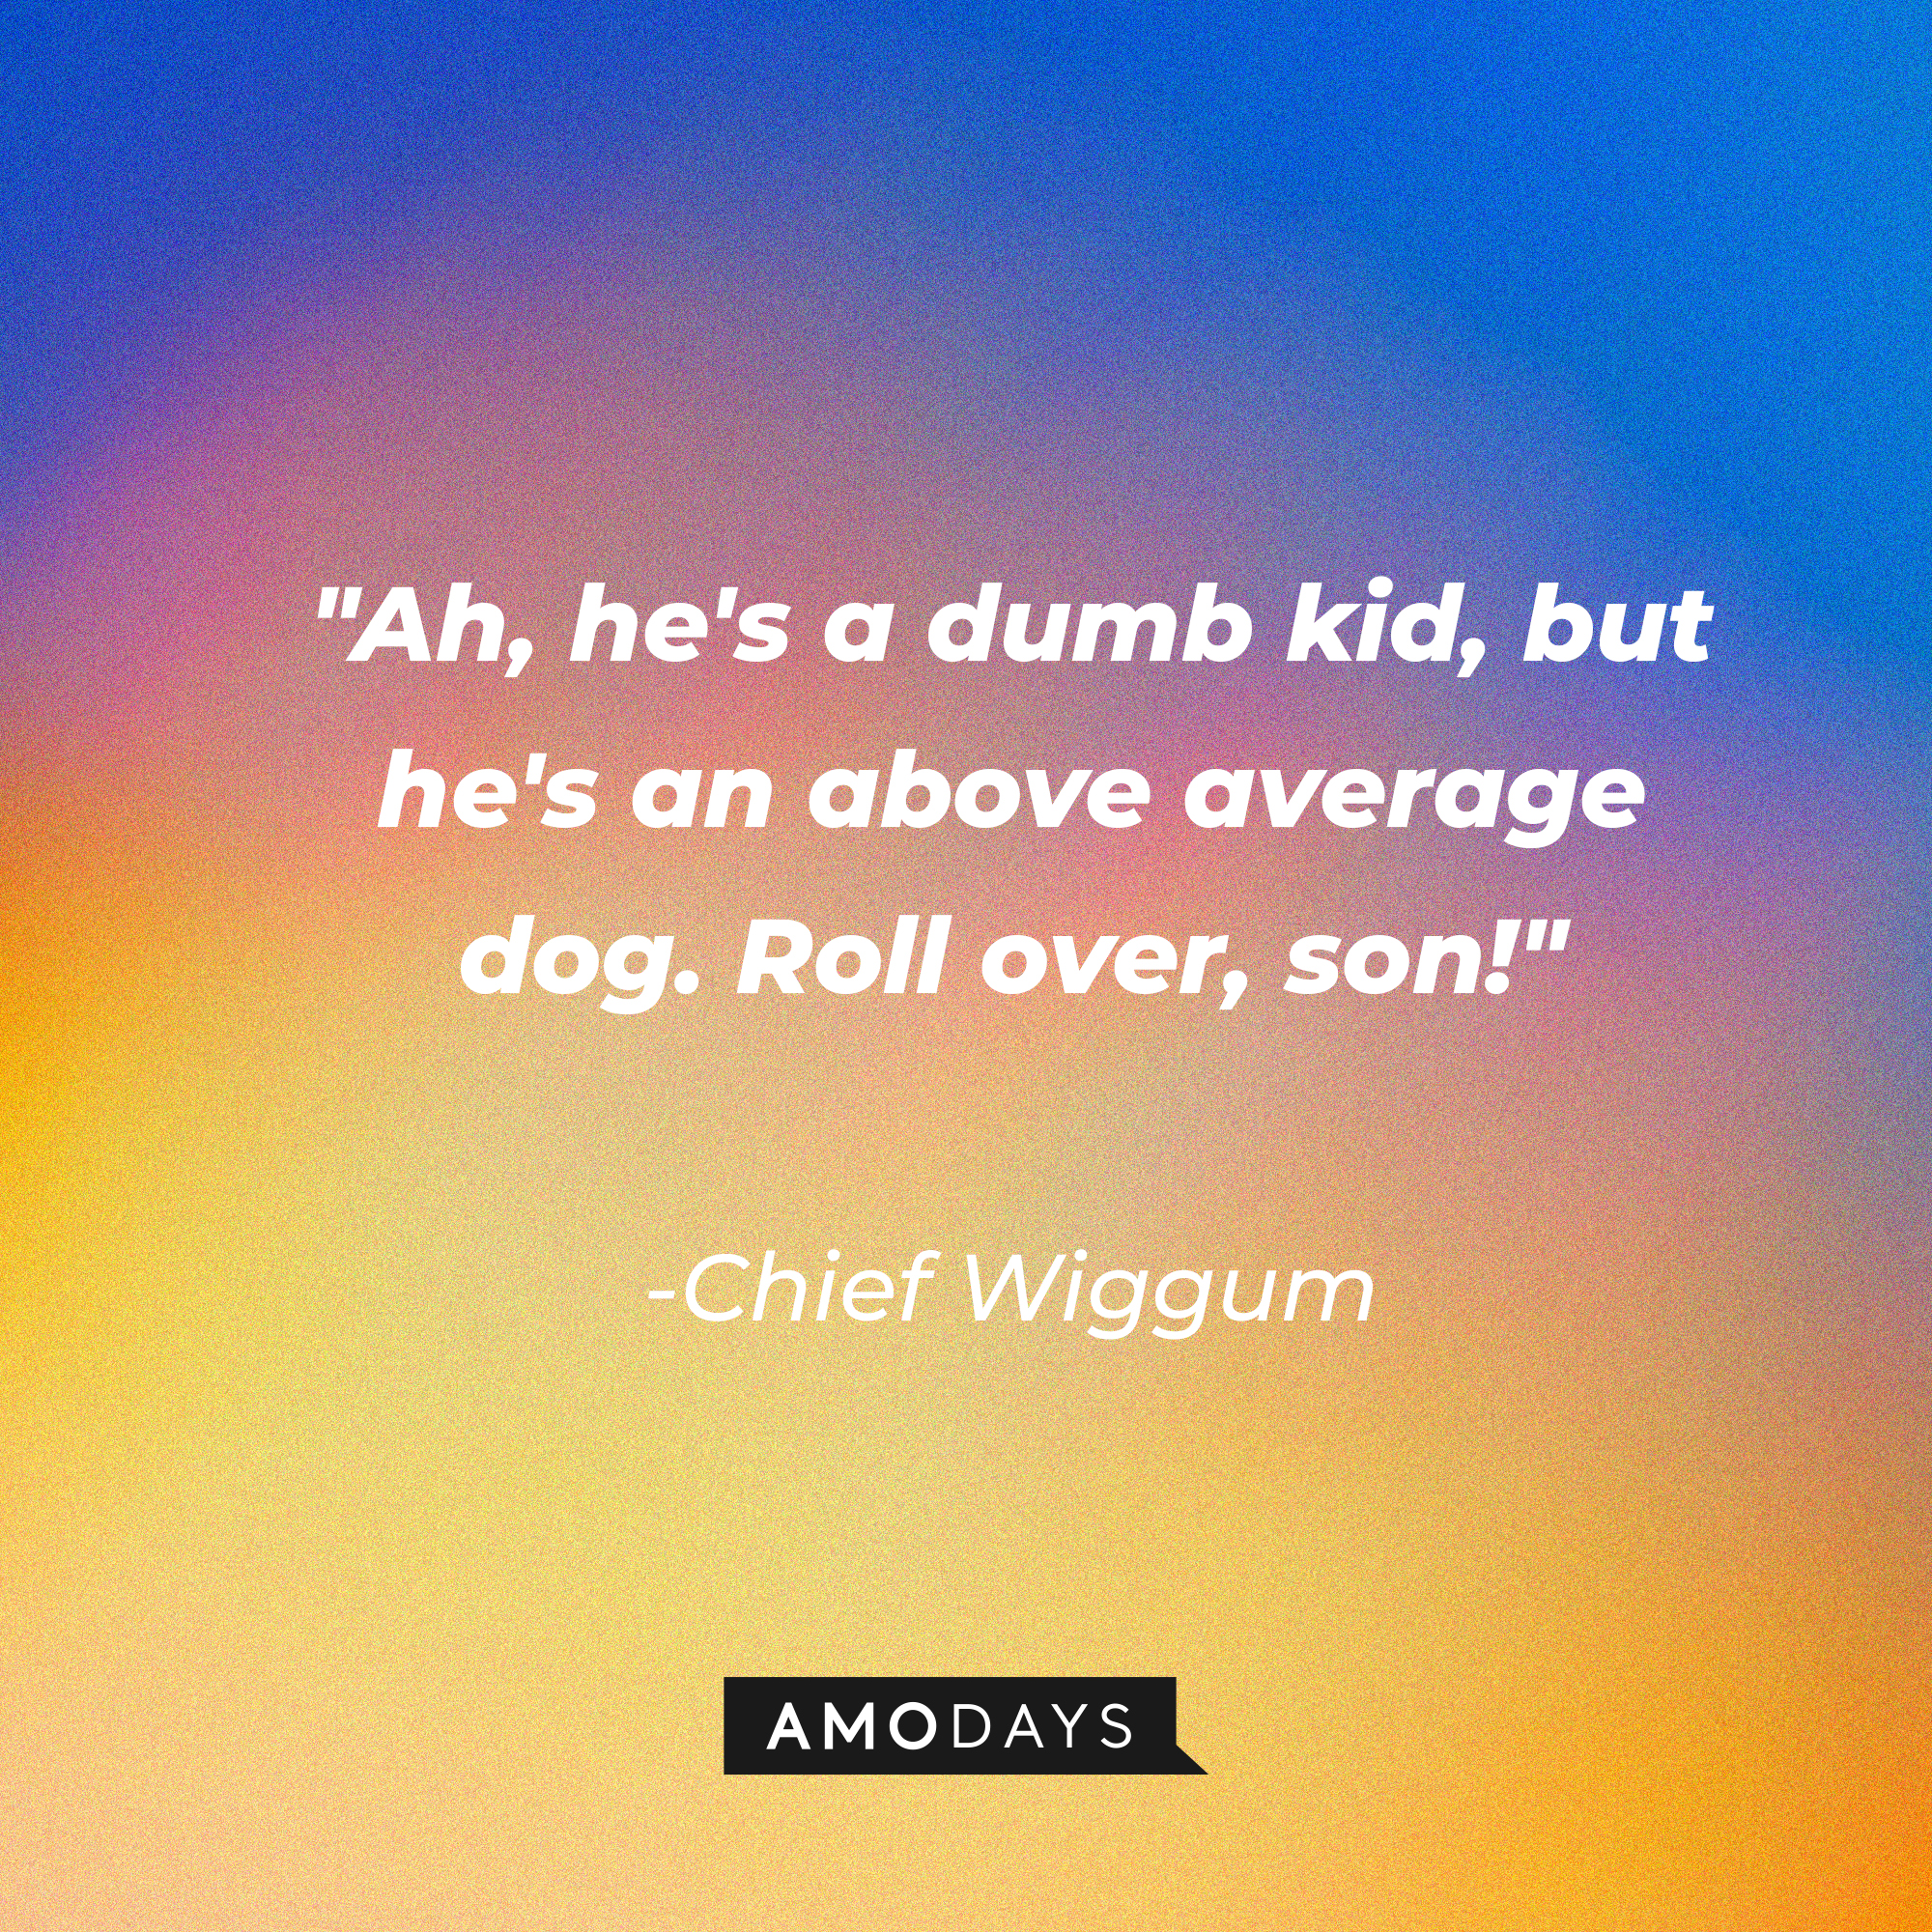 Chief Wiggum’s quote: "Ah, he's a dumb kid, but he's an above average dog. Roll over, son!" | Source: Amodays